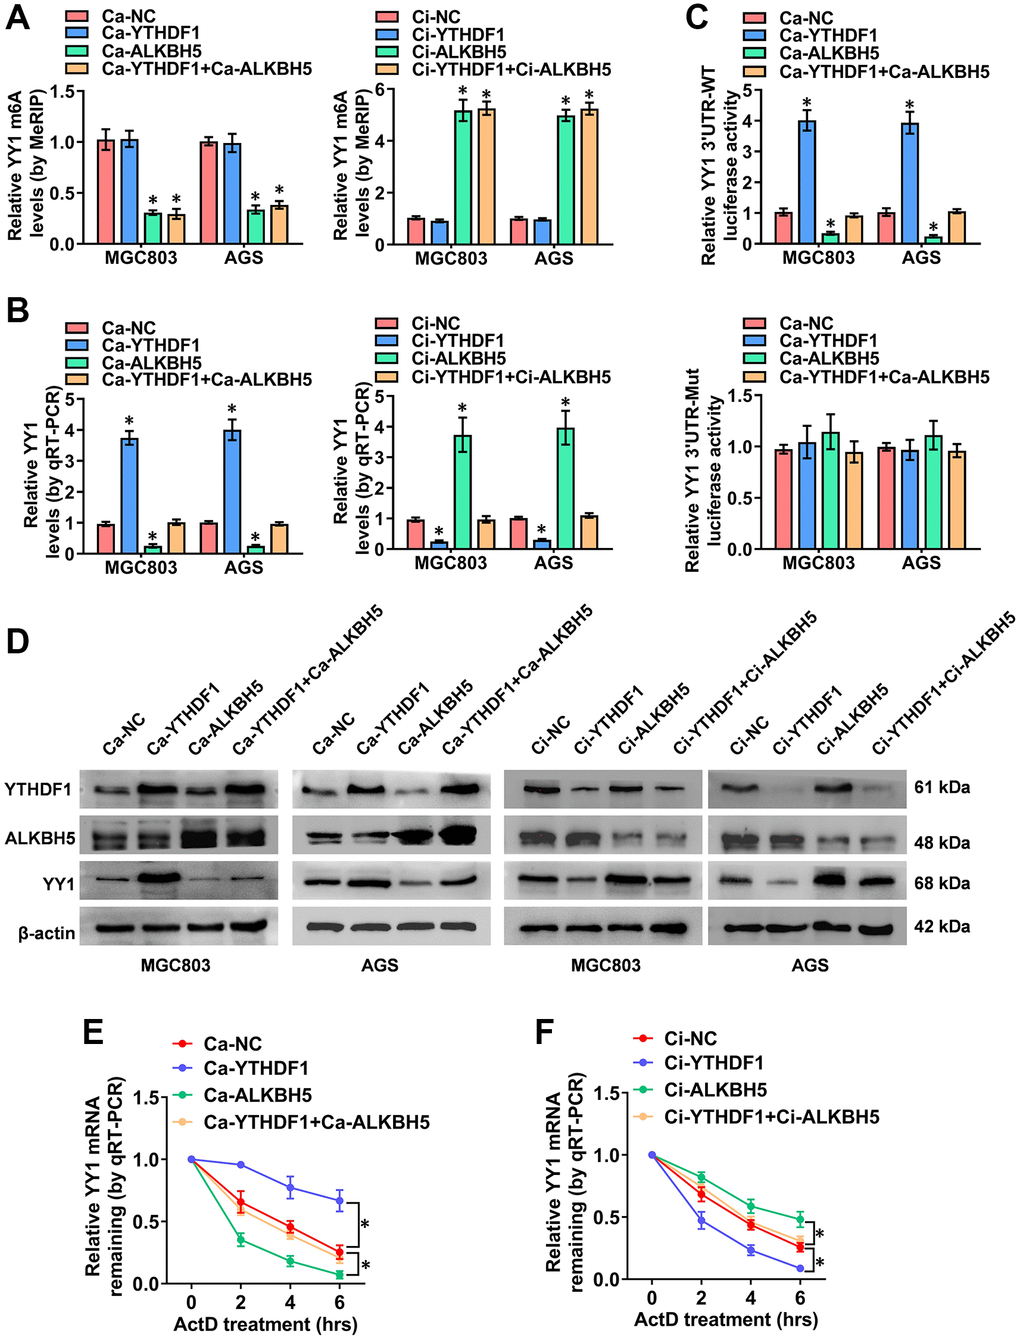 The m6A-dependent promotion of YY1 is positively associated with YTHDF1. (A–D) MeRIP, qRT-PCR, dual luciferase and western blot assays displaying the m6A and mRNA levels, as well as the 3'-UTR activity and protein expression of YY1 in MGC803 and AGS cells transfected with Ca-YTHDF1 or Ci-YTHDF1 and co-transfected with Ca-ALKBH5 or Ci-ALKBH5. (E, F) qRT-PCR assay showing the half-life levels of YY1 mRNA in AGS cells treated with actinomycin D (1 μg/ml) at the indicated periods. *P 